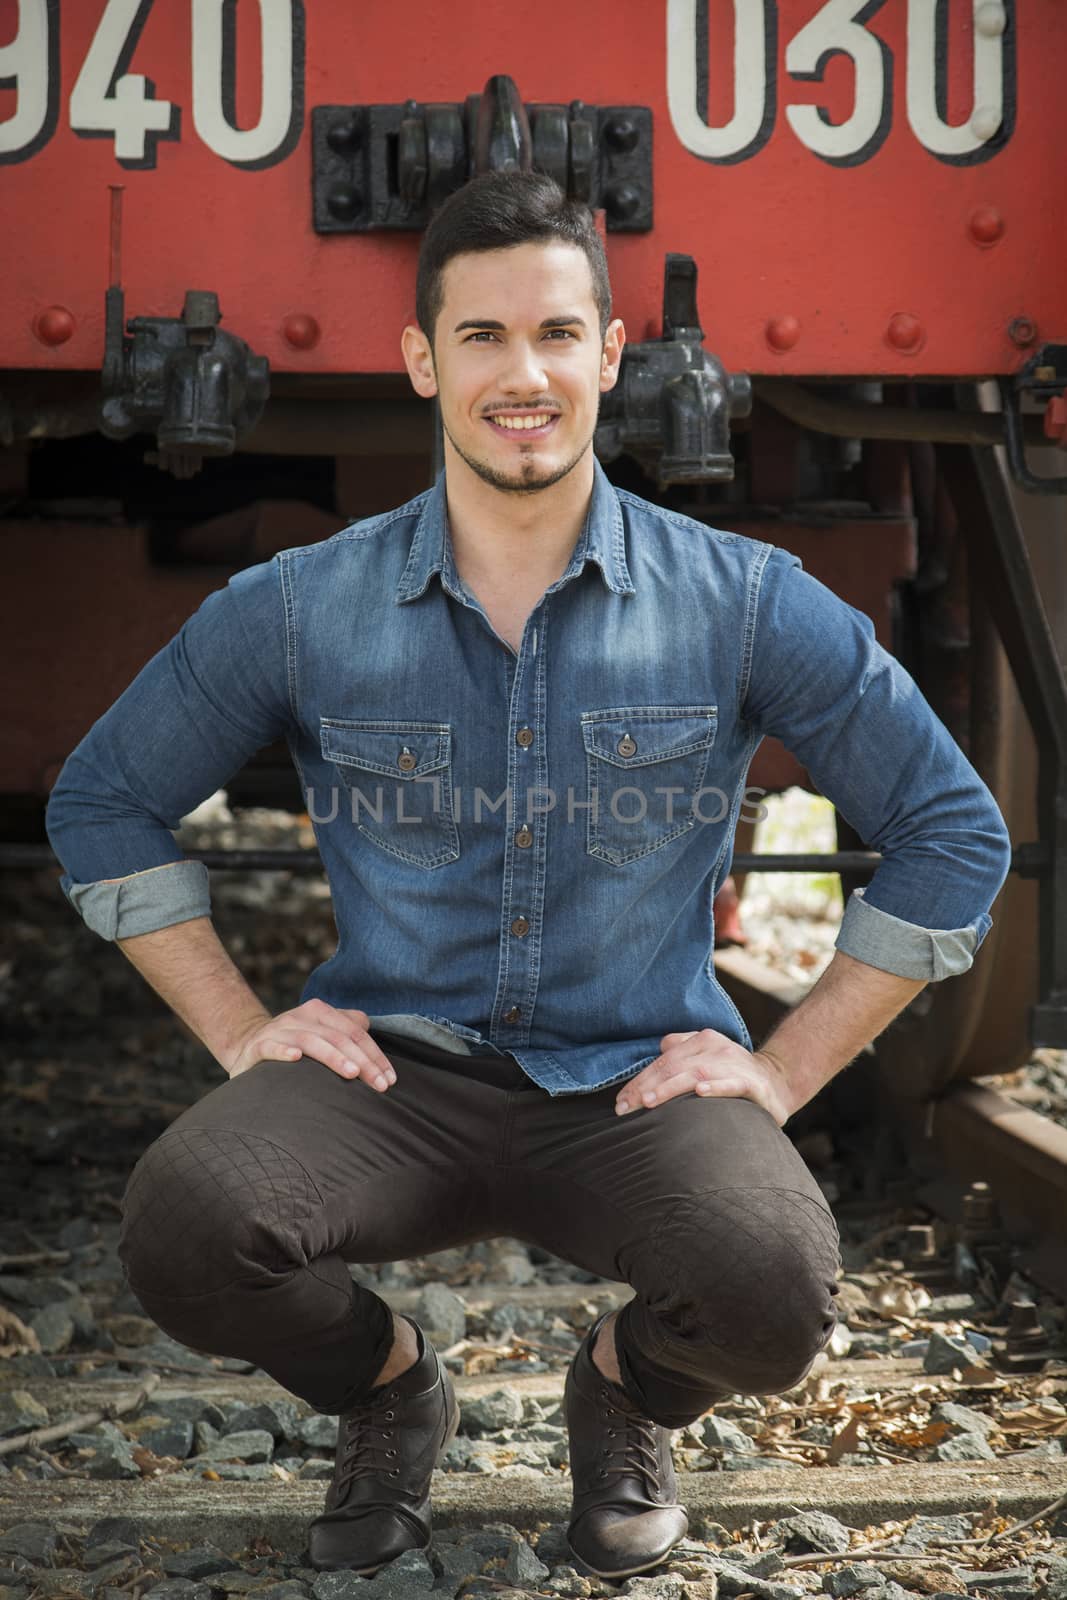 Handsome young man in denim shirt in front of old train by artofphoto